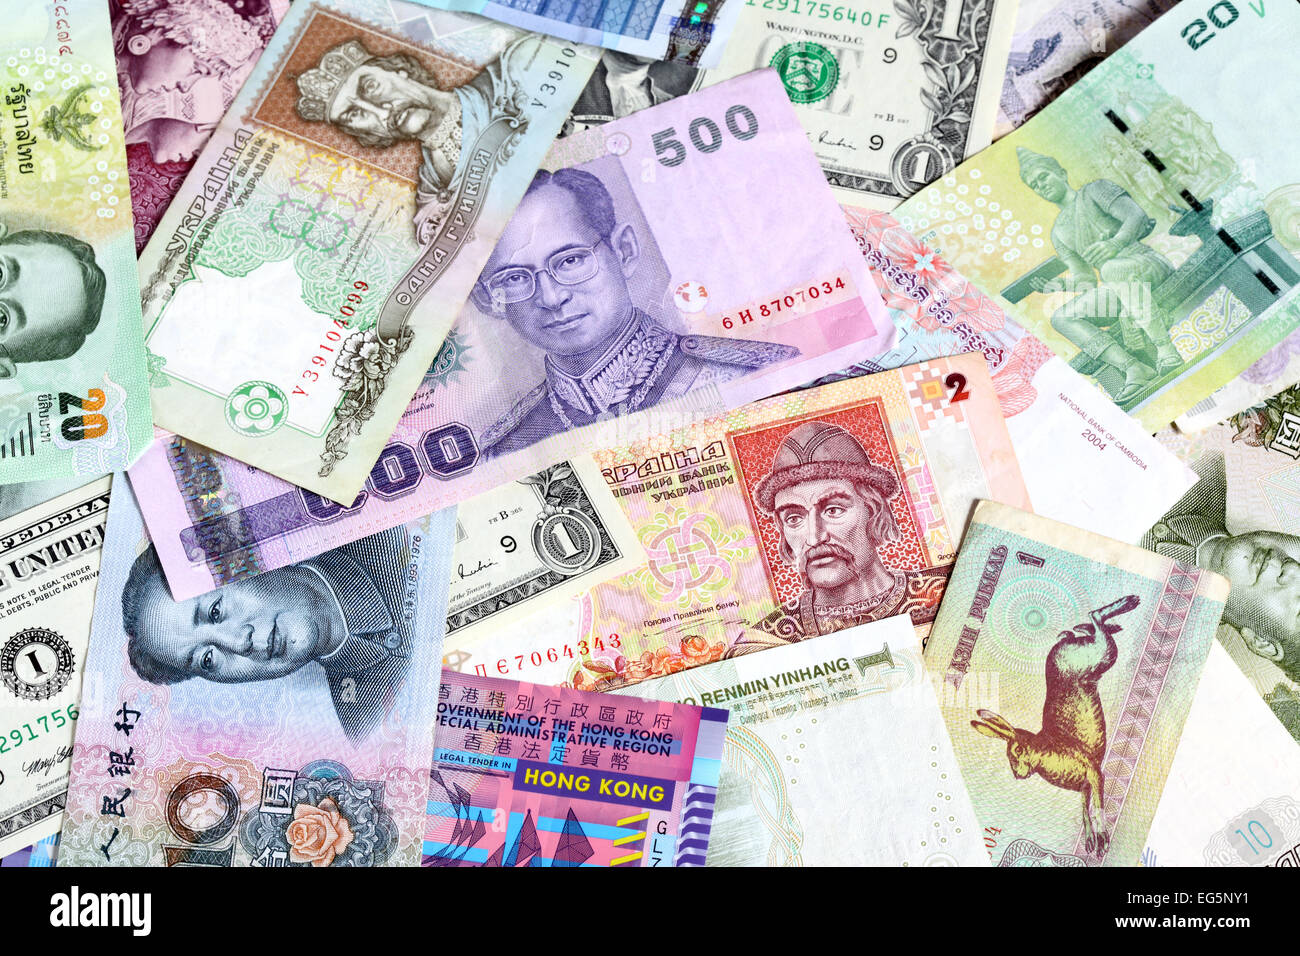 Money background - Various banknotes close-up Stock Photo